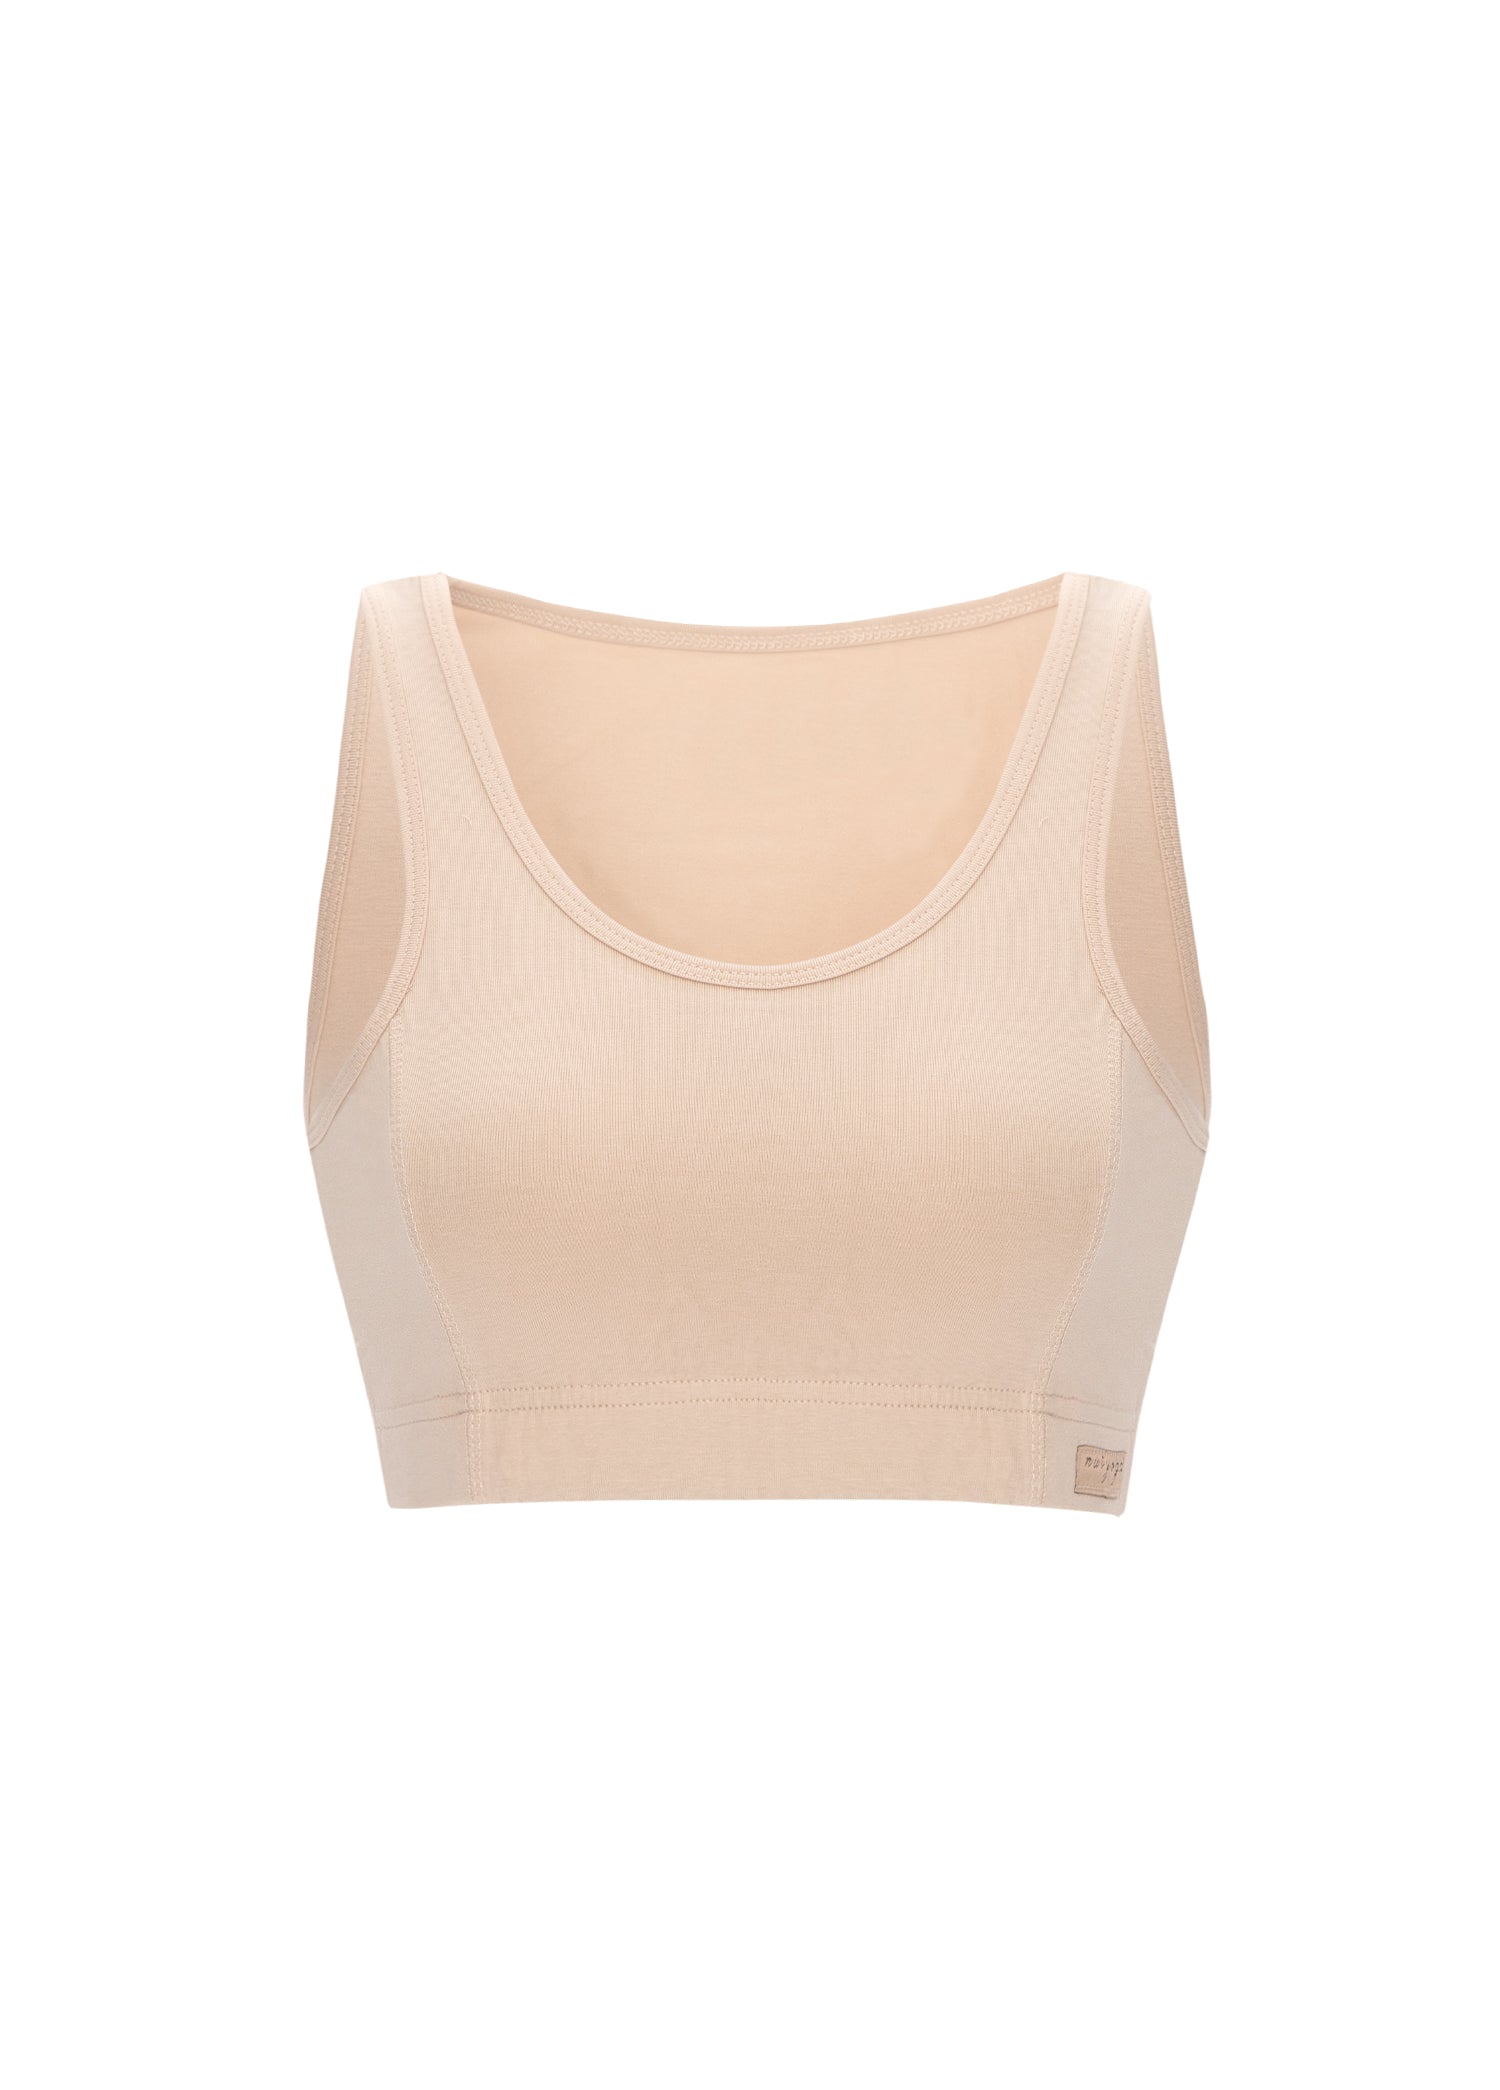 Organic Cotton Yoga Bra  Best natural sports bra for breast care - FROM  Clothing